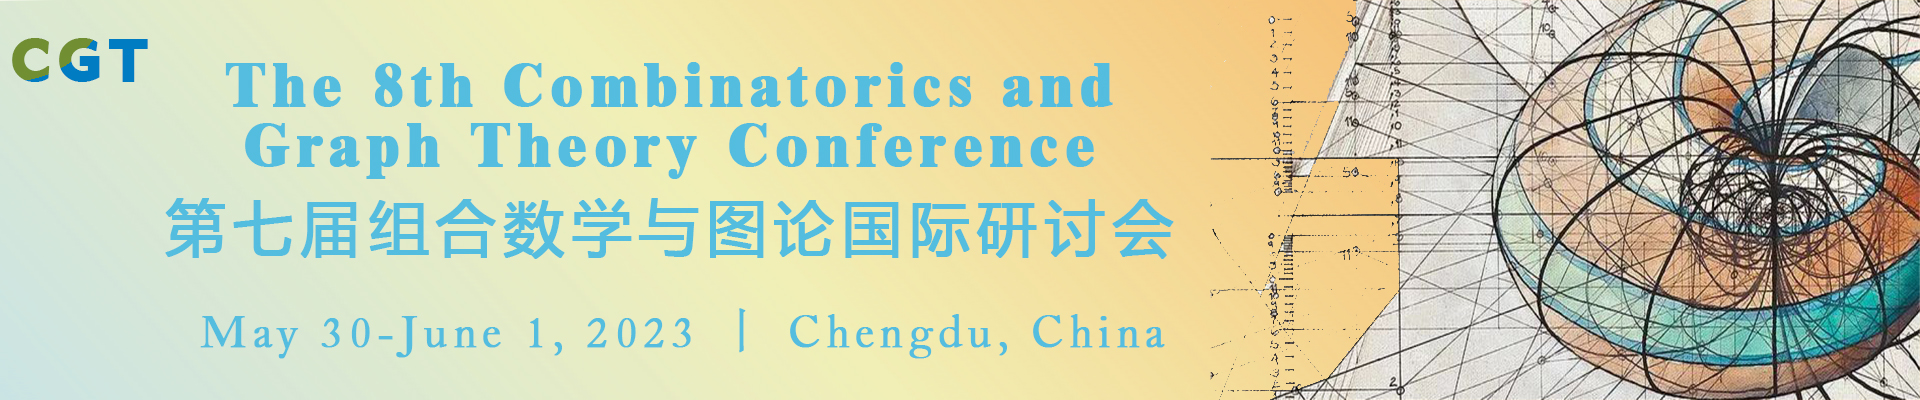 The 8th Combinatorics and Graph Theory Conference (CGT 2023), Chengdu, Sichuan, China